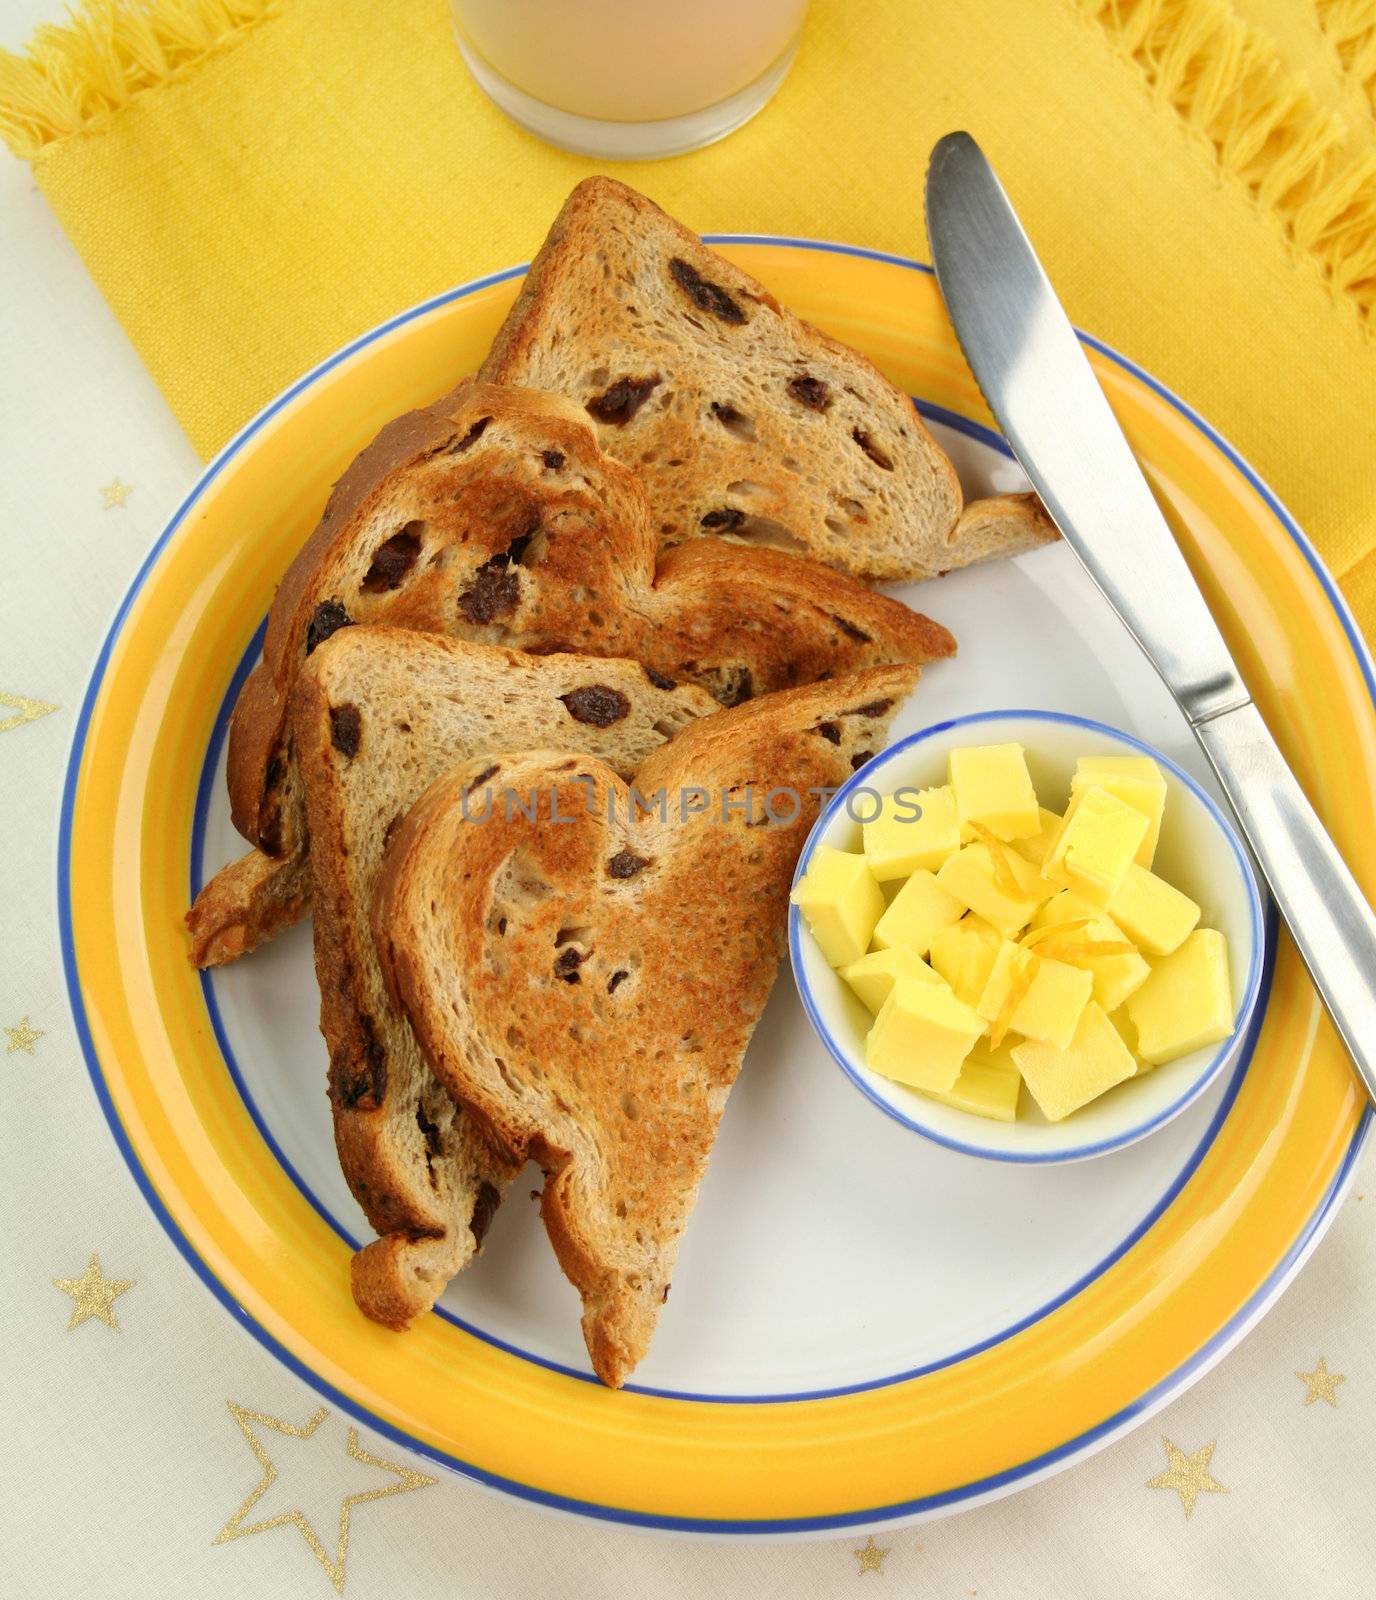 Delicious slices of toasted sultana bread with butter cubes.